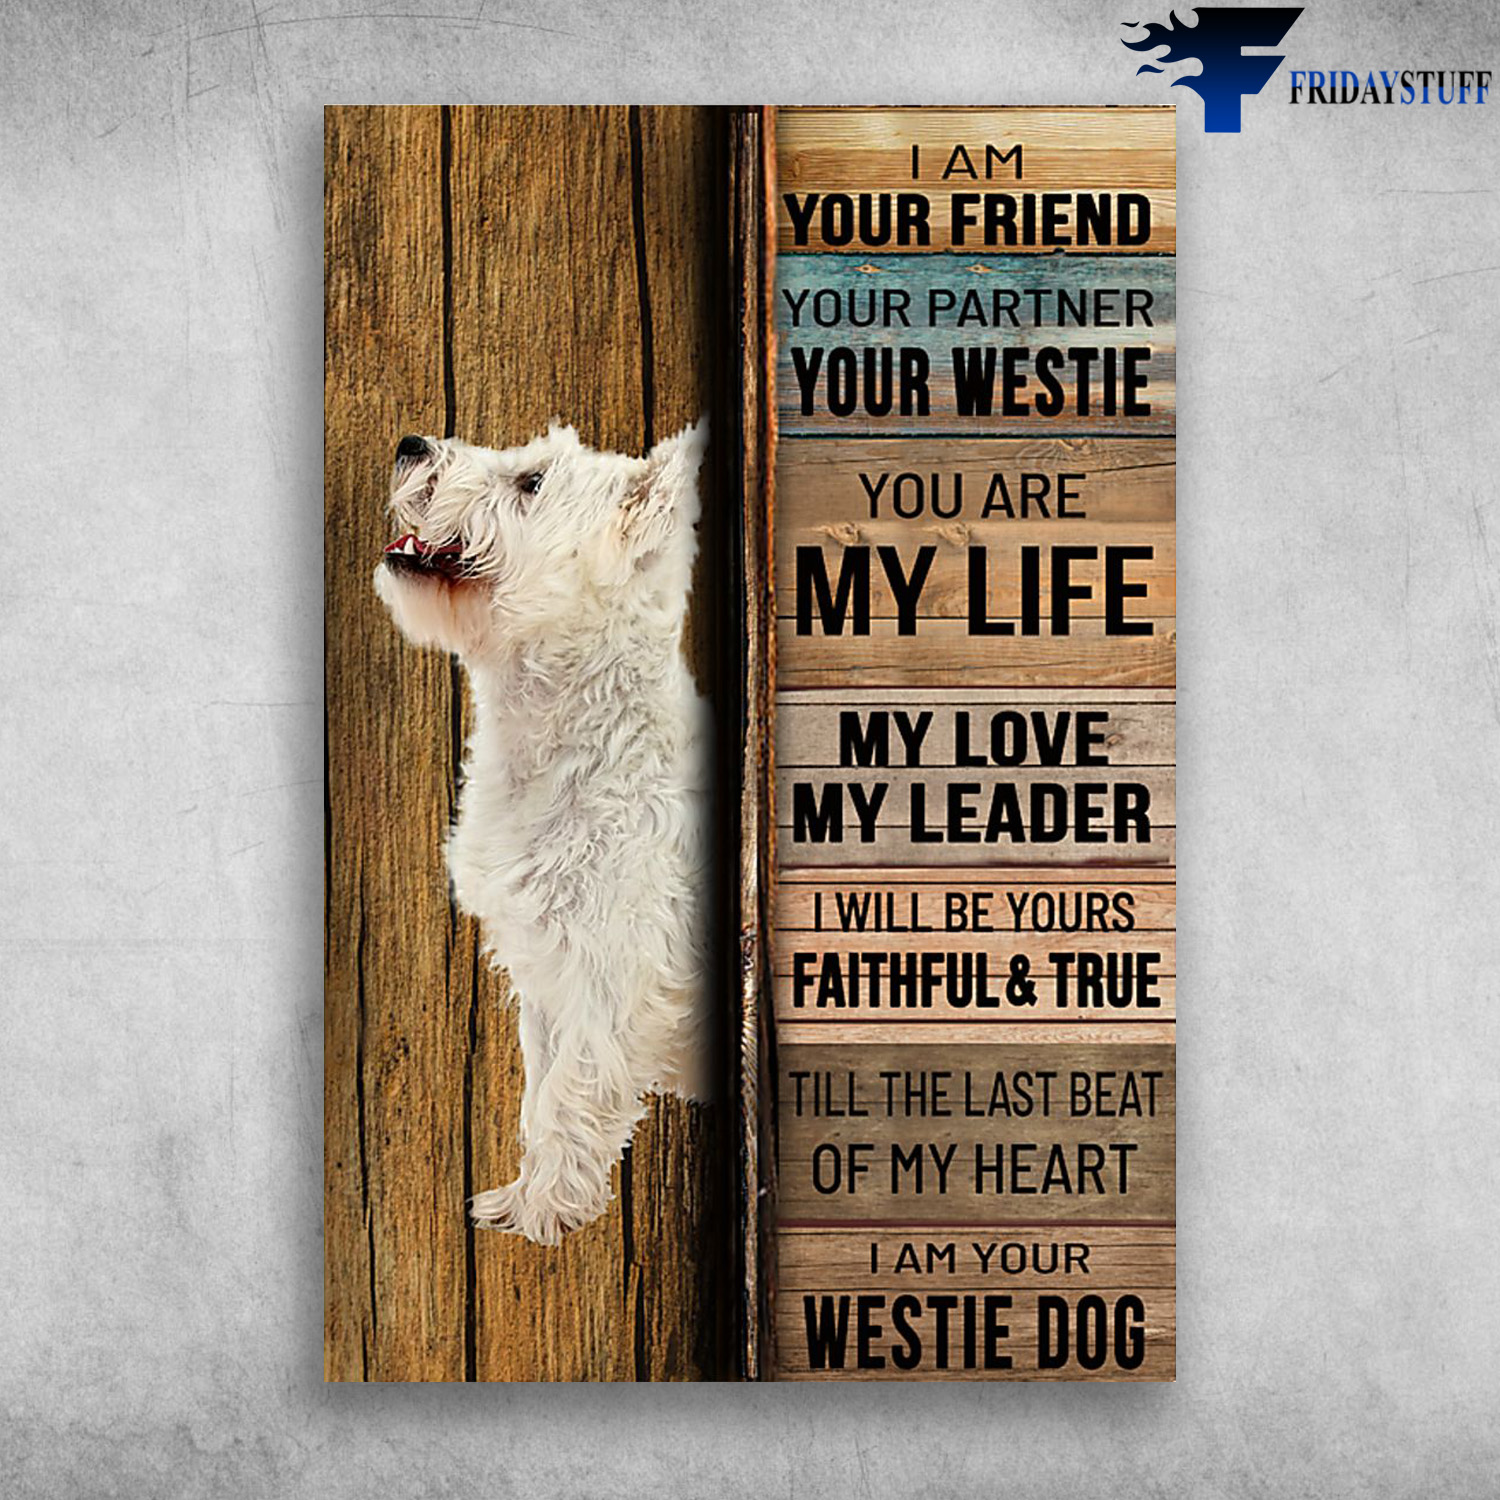 Westie Dog - I Am Your Friend, Your Partner, Your Westie, You Are My Life, My Love, My Leader, I Will Be Yours Faithful And True, Till The Last Beat Of My Heart, I Am Your Westie